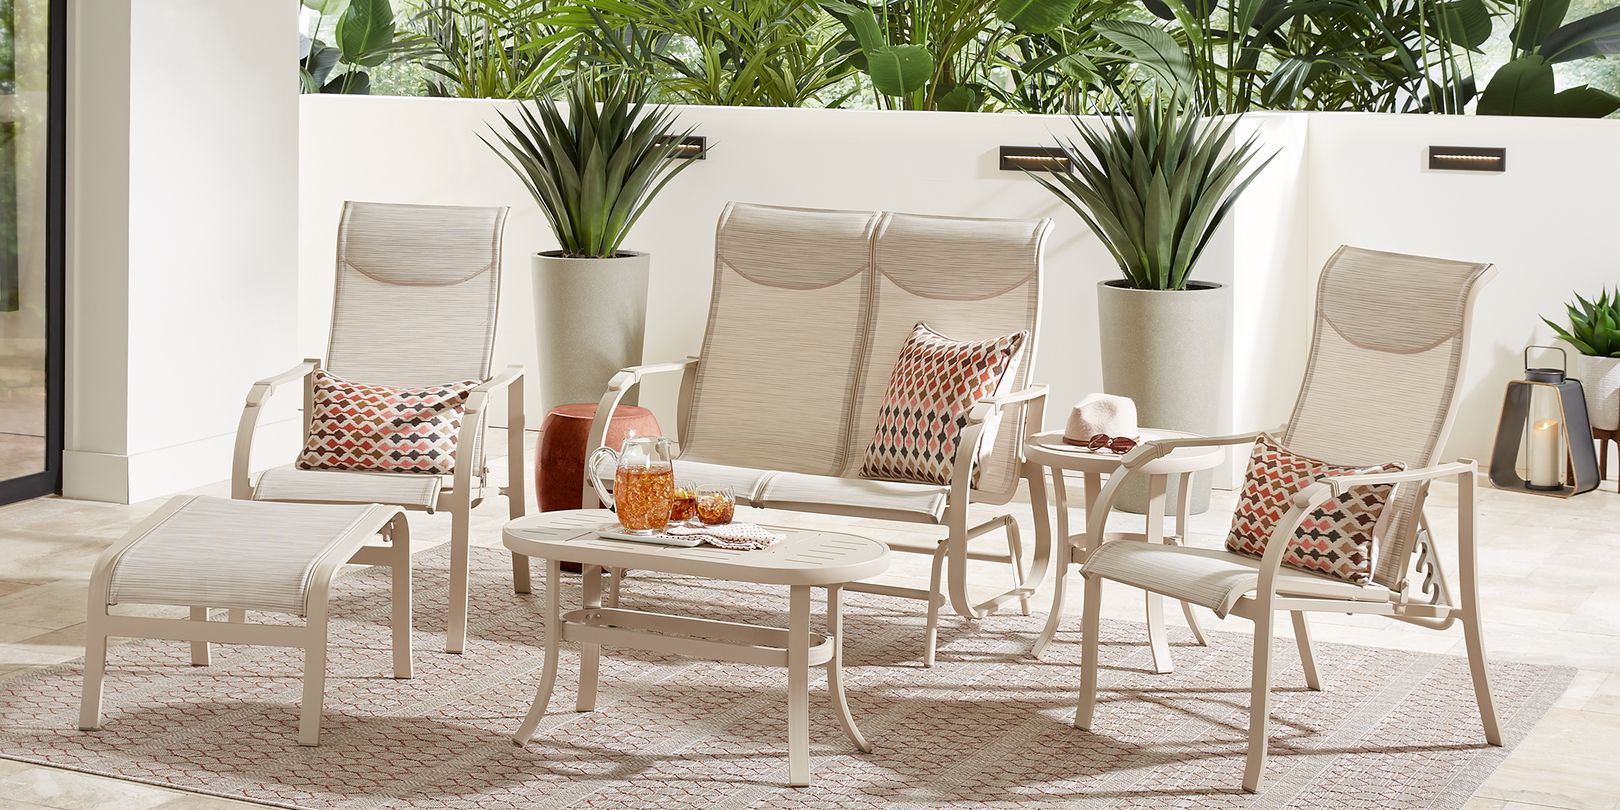 Photo of beige patio seating set with loveseat, chairs, ottoman and tables